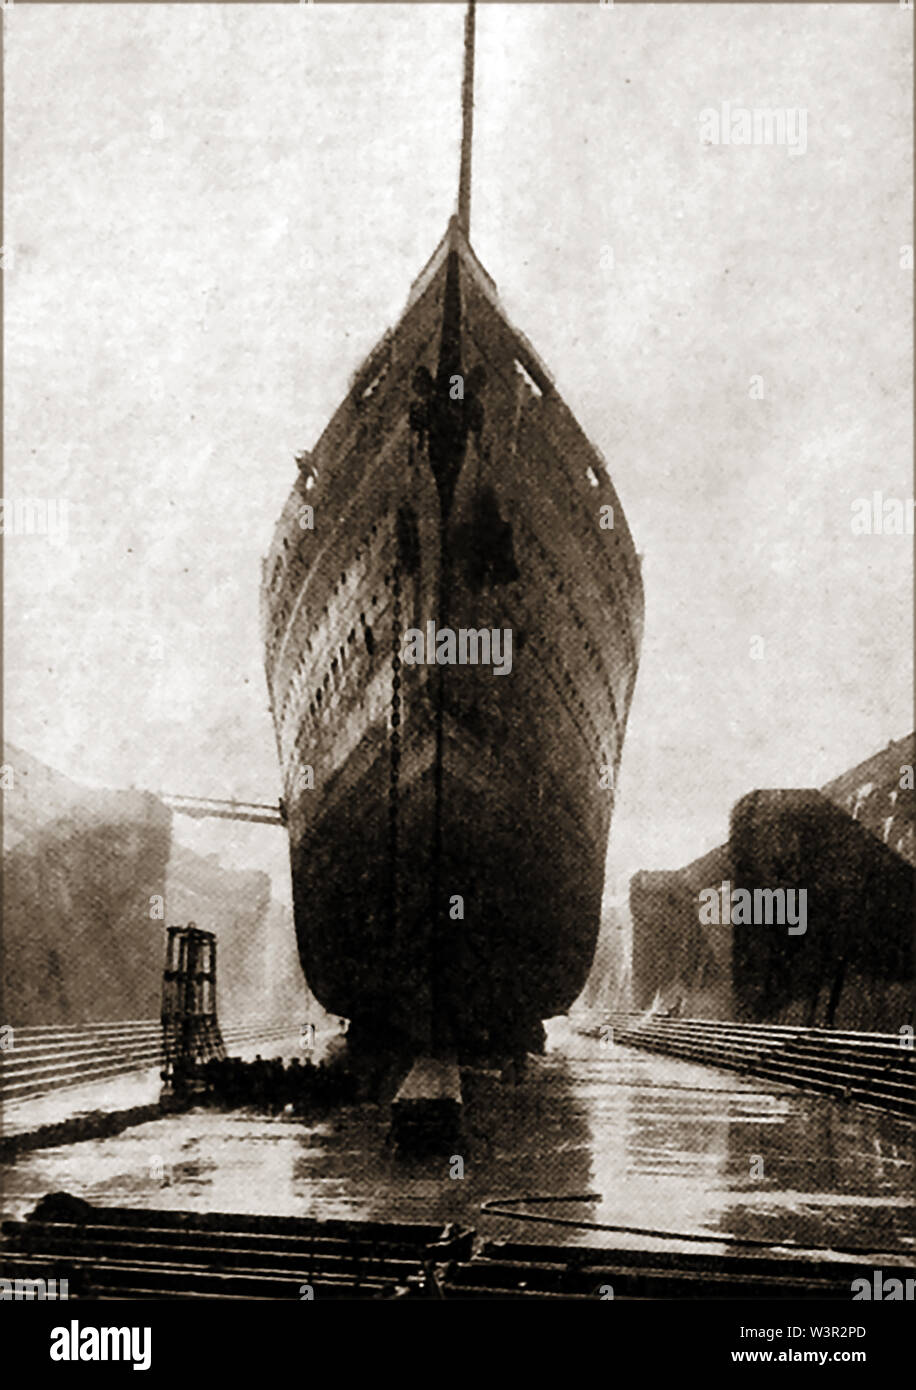 MAJESTIC /BISMARCK/ CALEDONIA - RMS Majestic was a White Star flagship ocean liner built in  1914, the largest ship in the world until completion of SS Normandie in 1935. It's seen here  in the former Southern Railway (King George V) Dry dock  in 1934 and after she was saved from the scrapyard by  the Royal Navy, renamed and became the training ship HMS Caledonia before catching fire in 1939 and sinking. - She was originally  launched in 1914 as the Hamburg America Line liner SS Bismarck Stock Photo